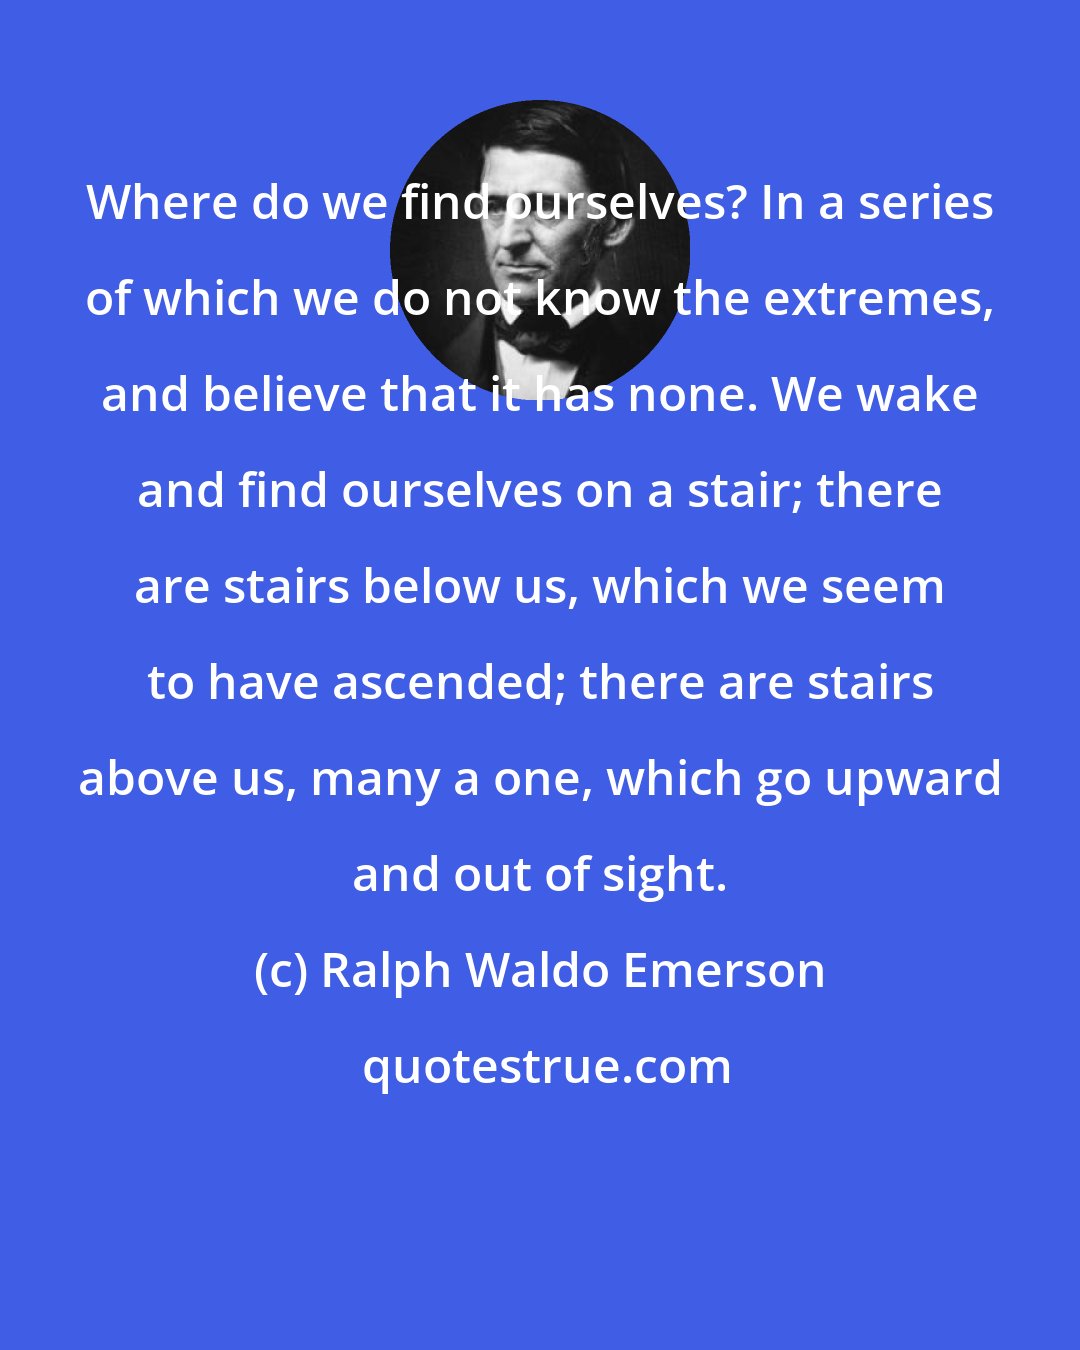 Ralph Waldo Emerson: Where do we find ourselves? In a series of which we do not know the extremes, and believe that it has none. We wake and find ourselves on a stair; there are stairs below us, which we seem to have ascended; there are stairs above us, many a one, which go upward and out of sight.